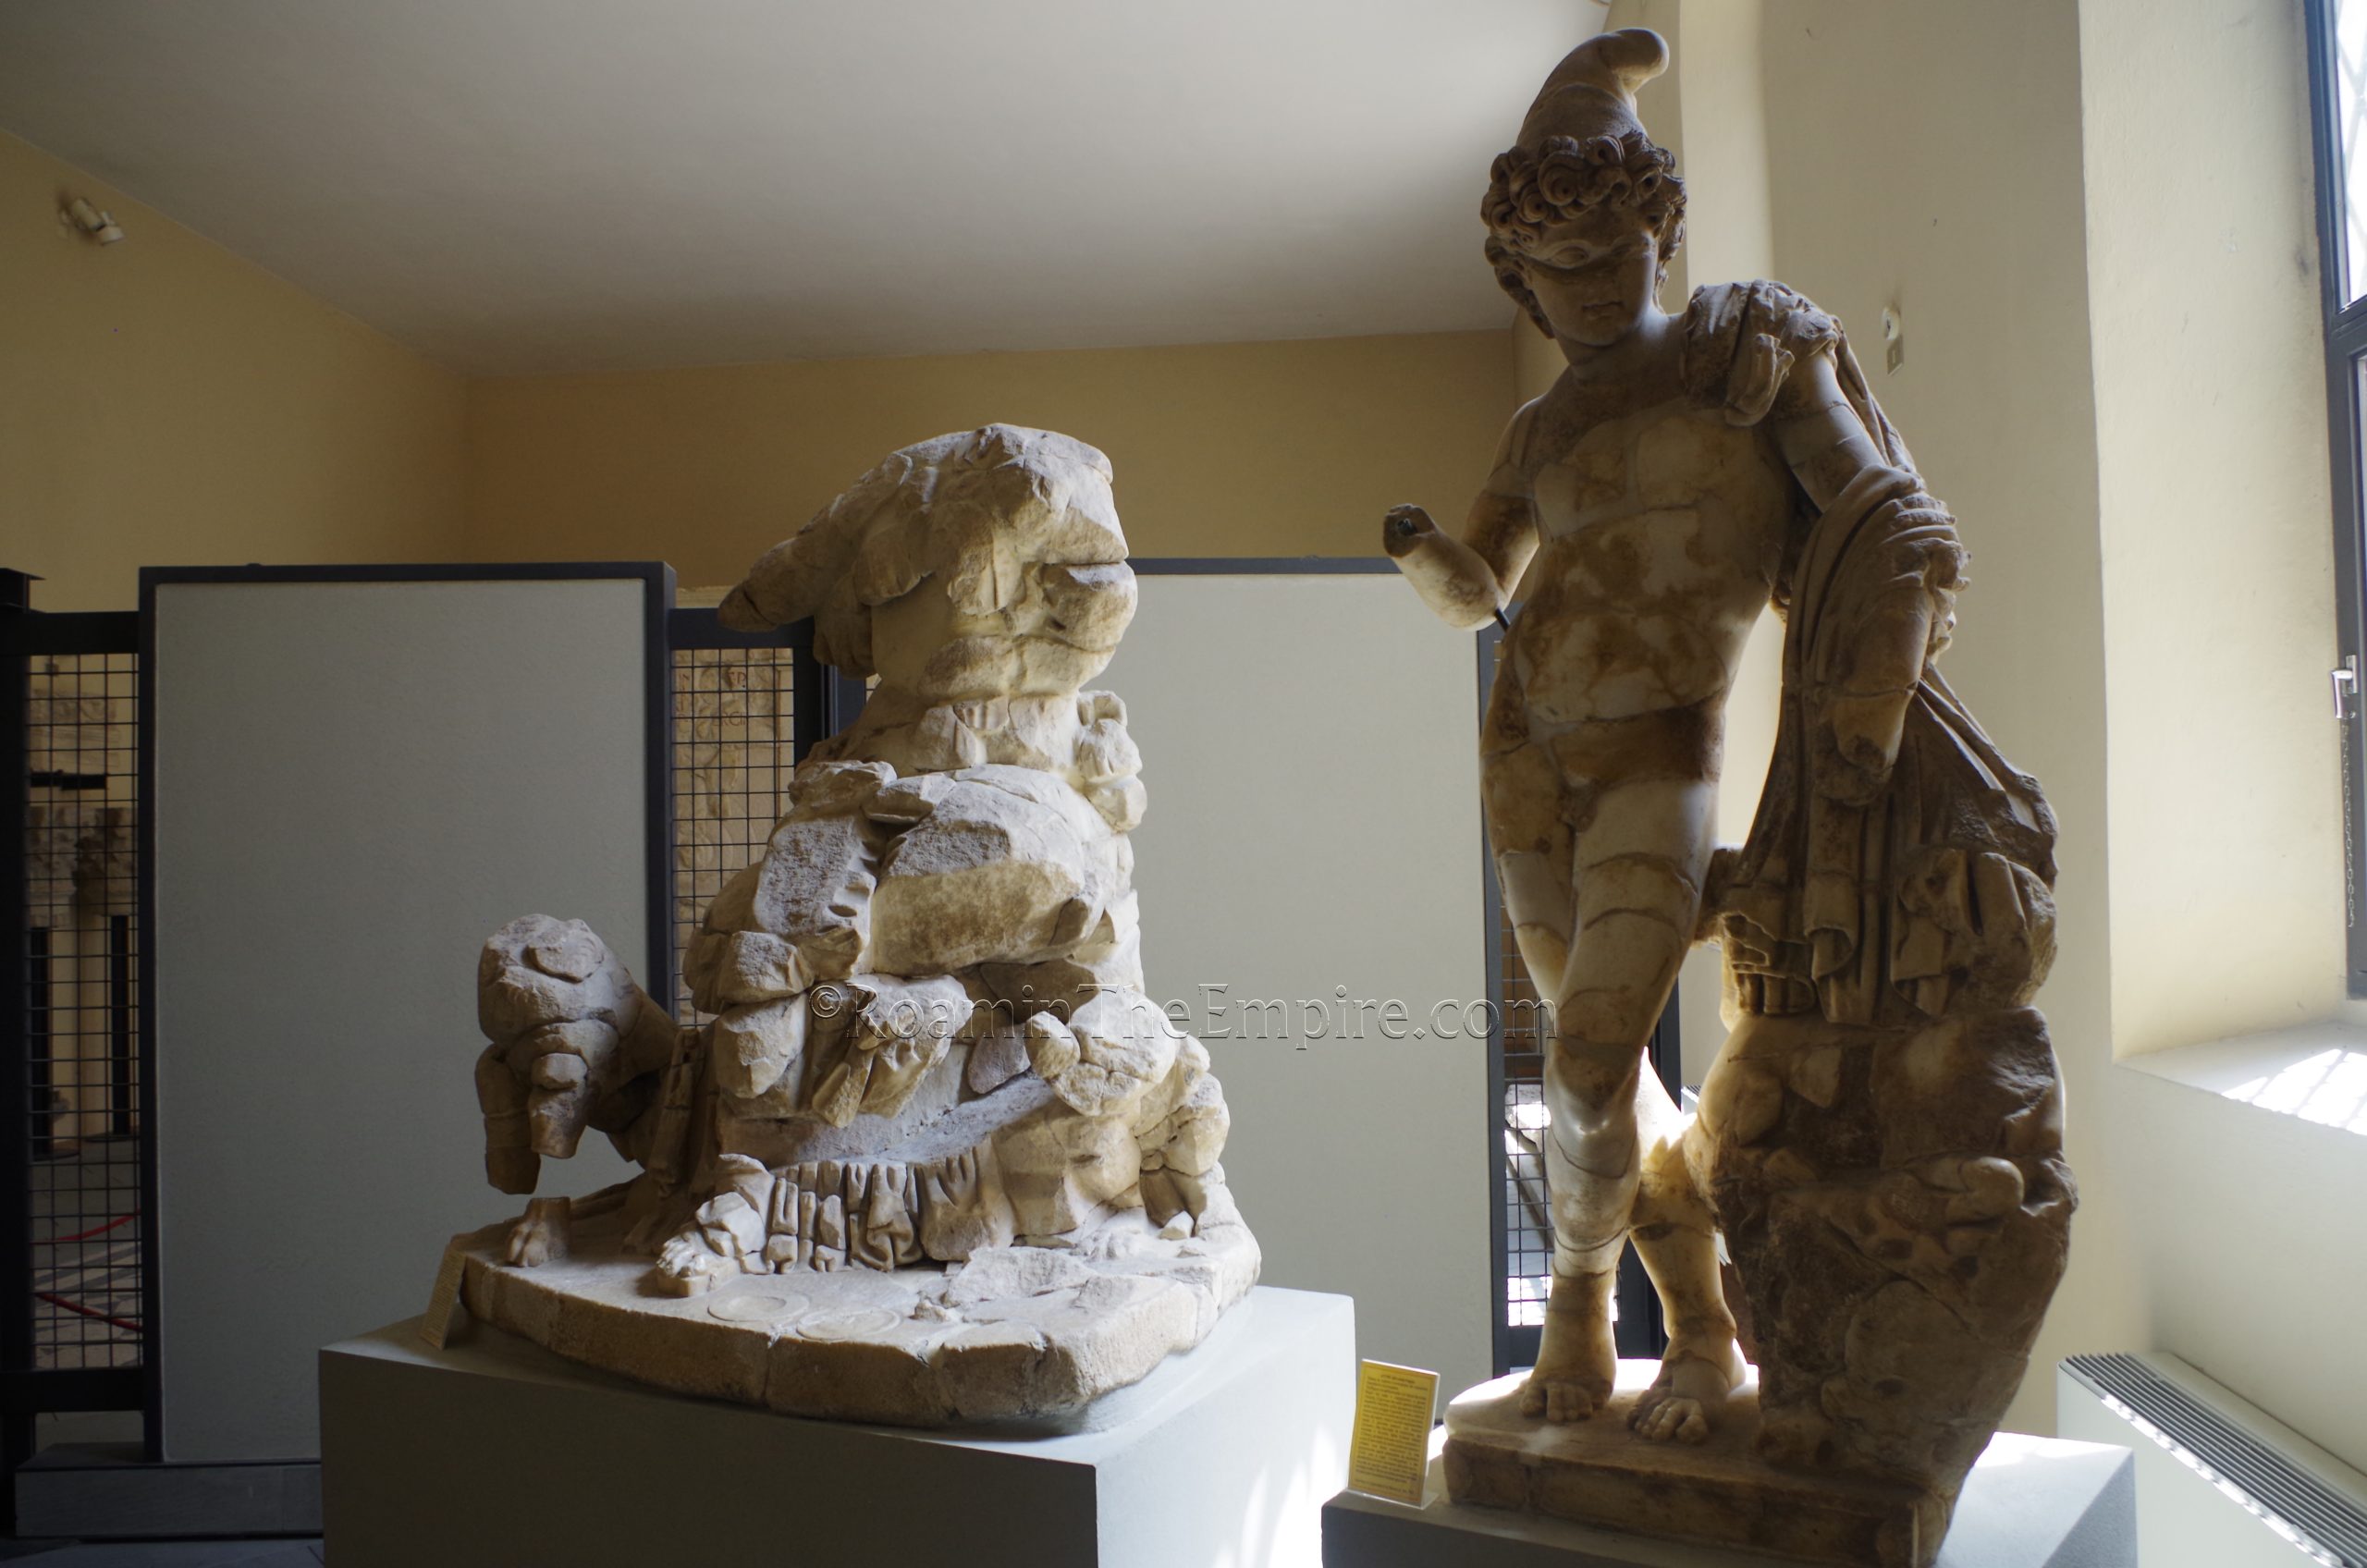 Magna Mater/Cybele and Attis statues in the Museo Nazionale Archaeologico. Sarsina.